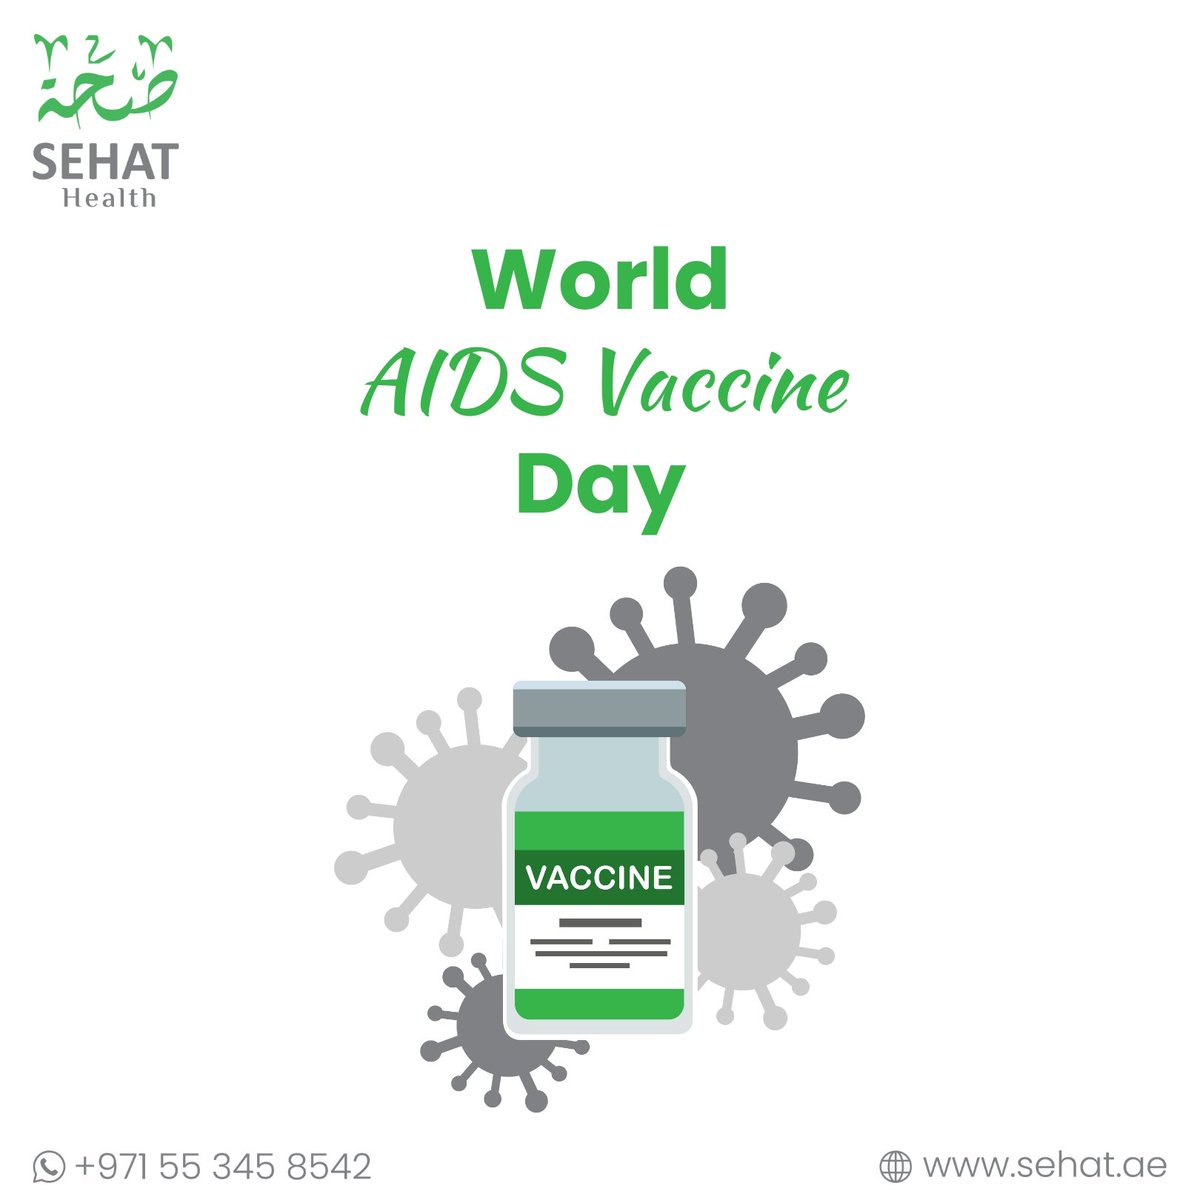 Today, we honor the dedication of those working tirelessly towards an HIV vaccine. Their efforts bring us closer to ending #AIDS.

Join us in spreading hope & raising #aidsawareness

#WorldAIDSVaccineDay #EndAIDS #findcure #diseases #dubaihealthcare #vaccine